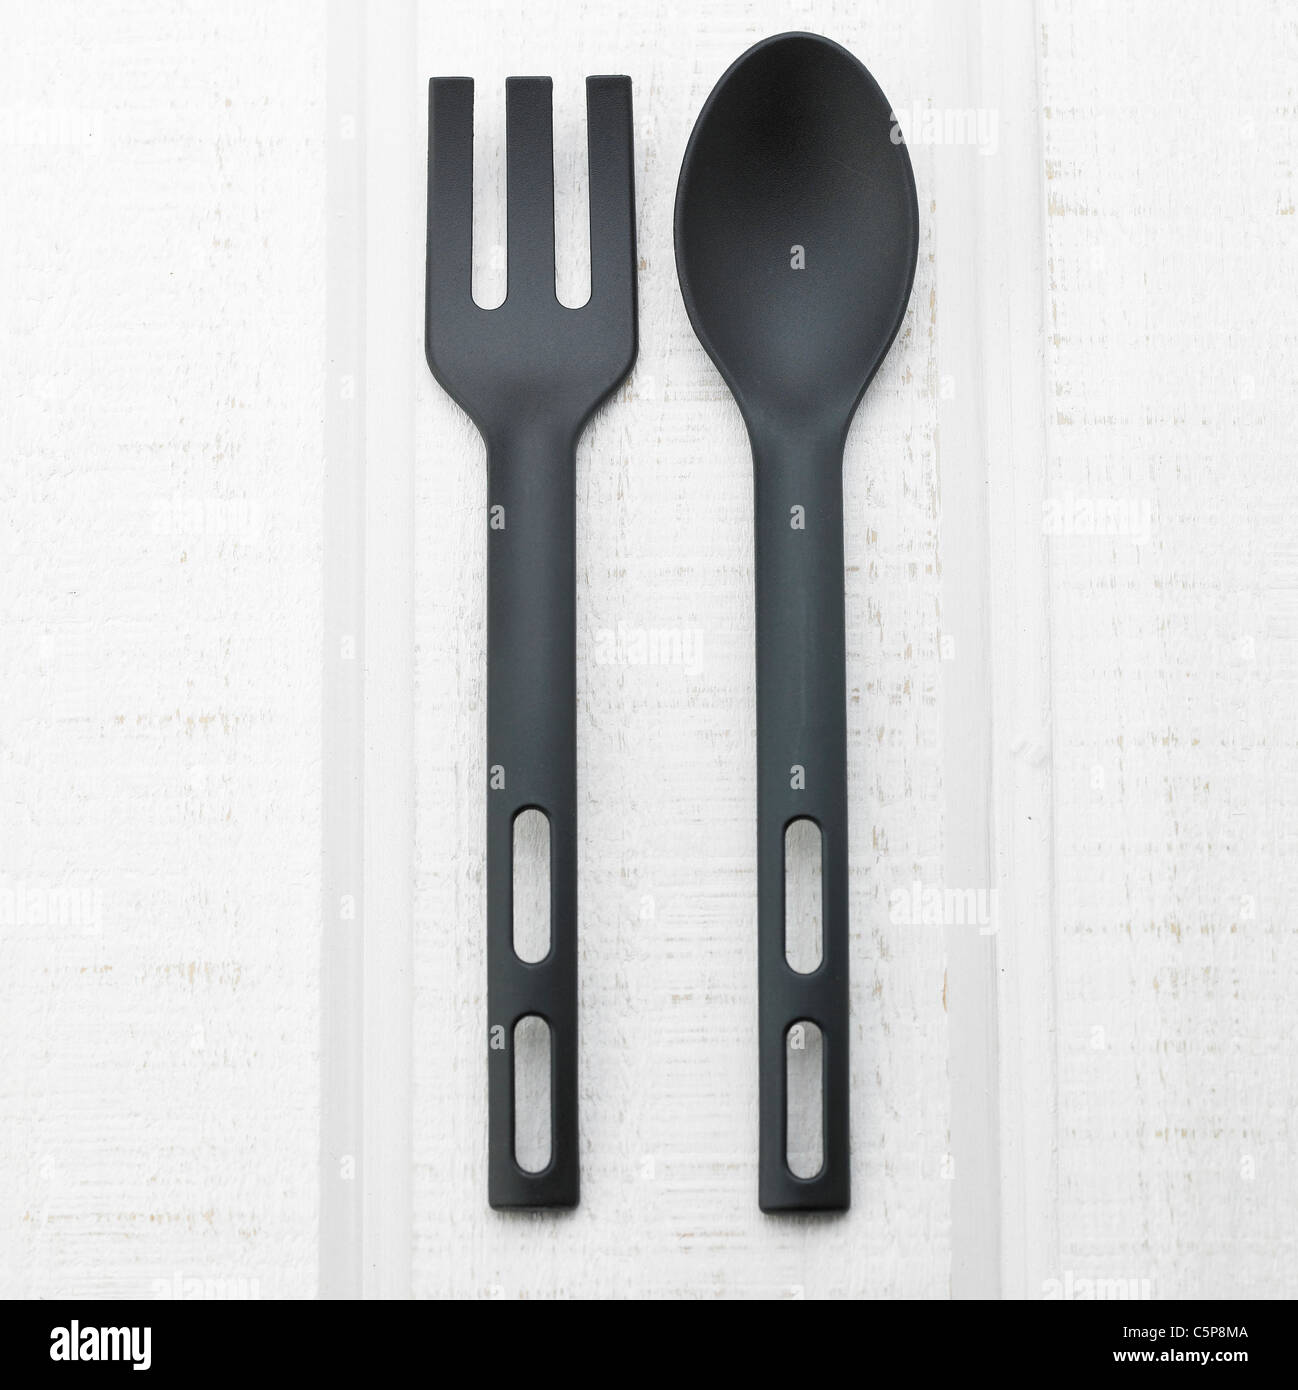 A spoon and a fork Stock Photo